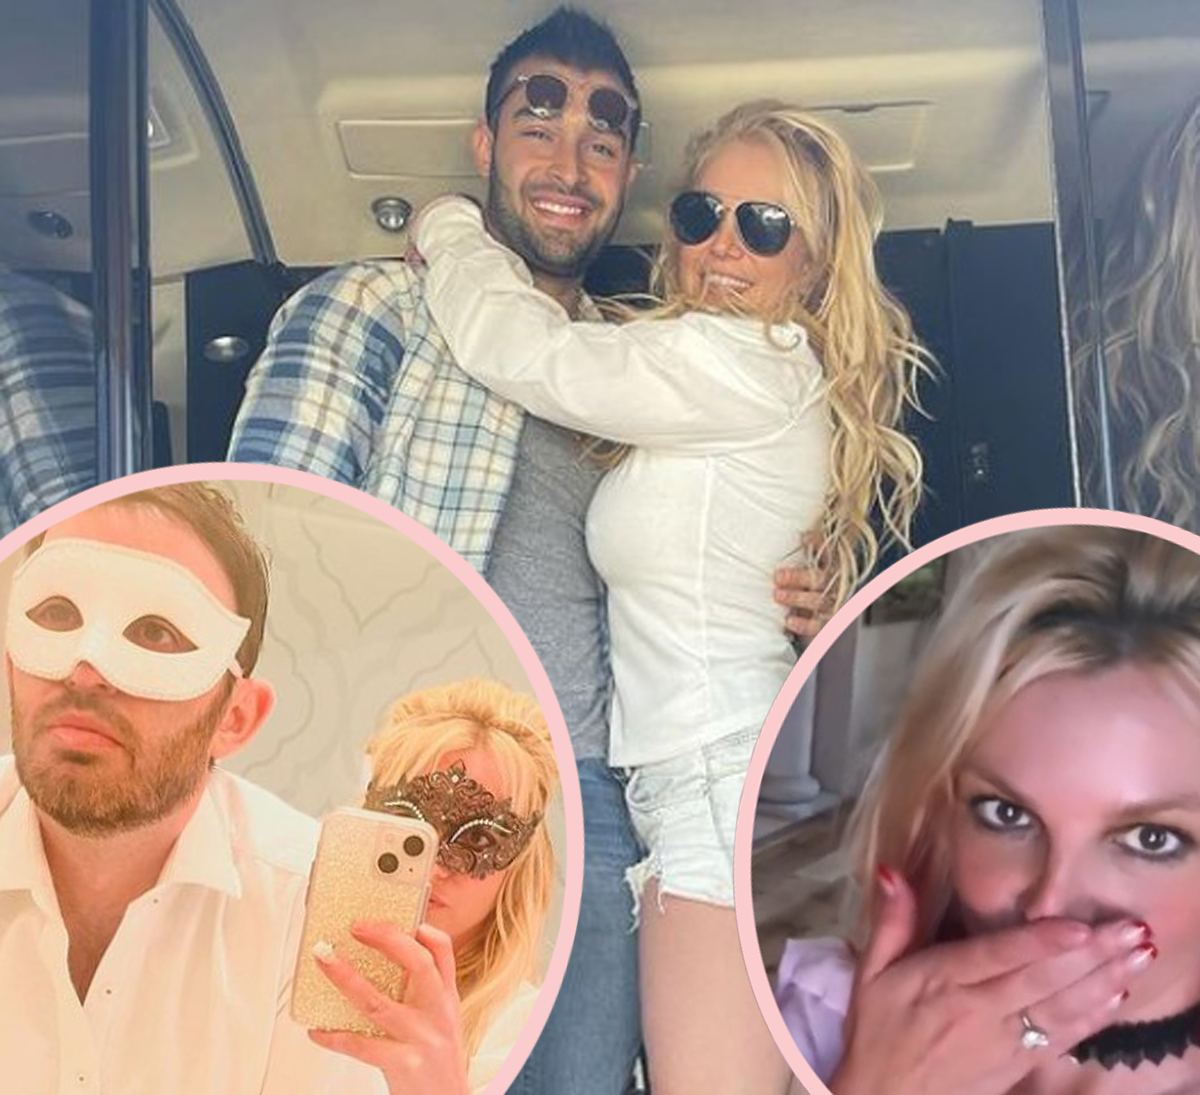 #Sam Asghari Didn’t Get Britney Spears A ‘Million Dollar Ring’ — And Not The One He Thinks Either!